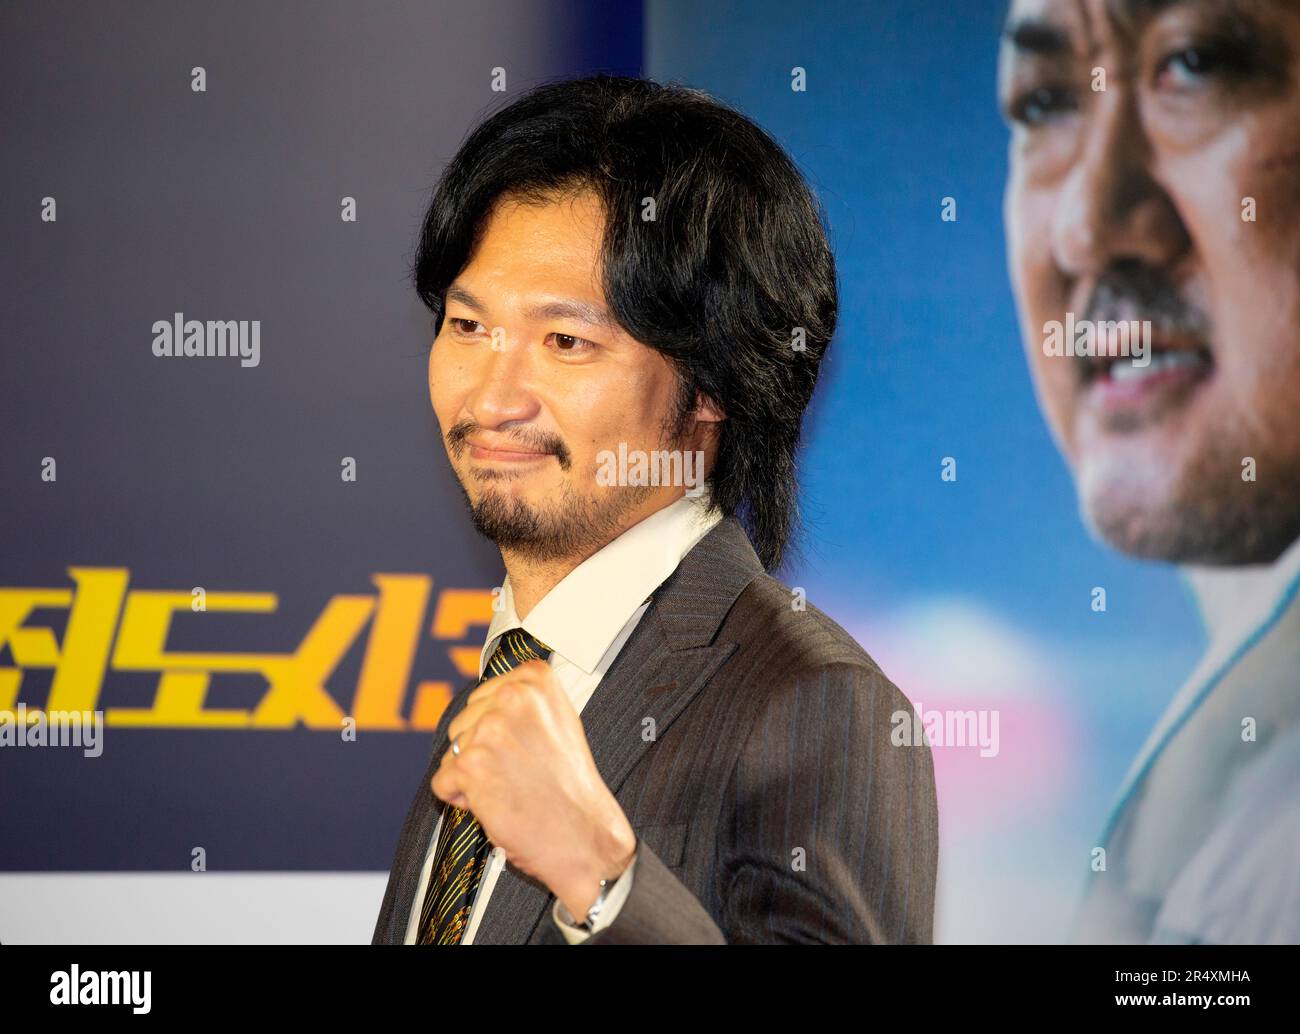 Aoki Munetaka, May 22, 2023 : Japanese actor Aoki Munetaka attends a photocall before a VIP preview of South Korean movie 'The Roundup: No Way Out' in Seoul, South Korea. 'The Roundup: No Way Out', the third installment of 'The Outlaws' series will hit local theaters on May 31. Credit: Lee Jae-Won/AFLO/Alamy Live News Stock Photo